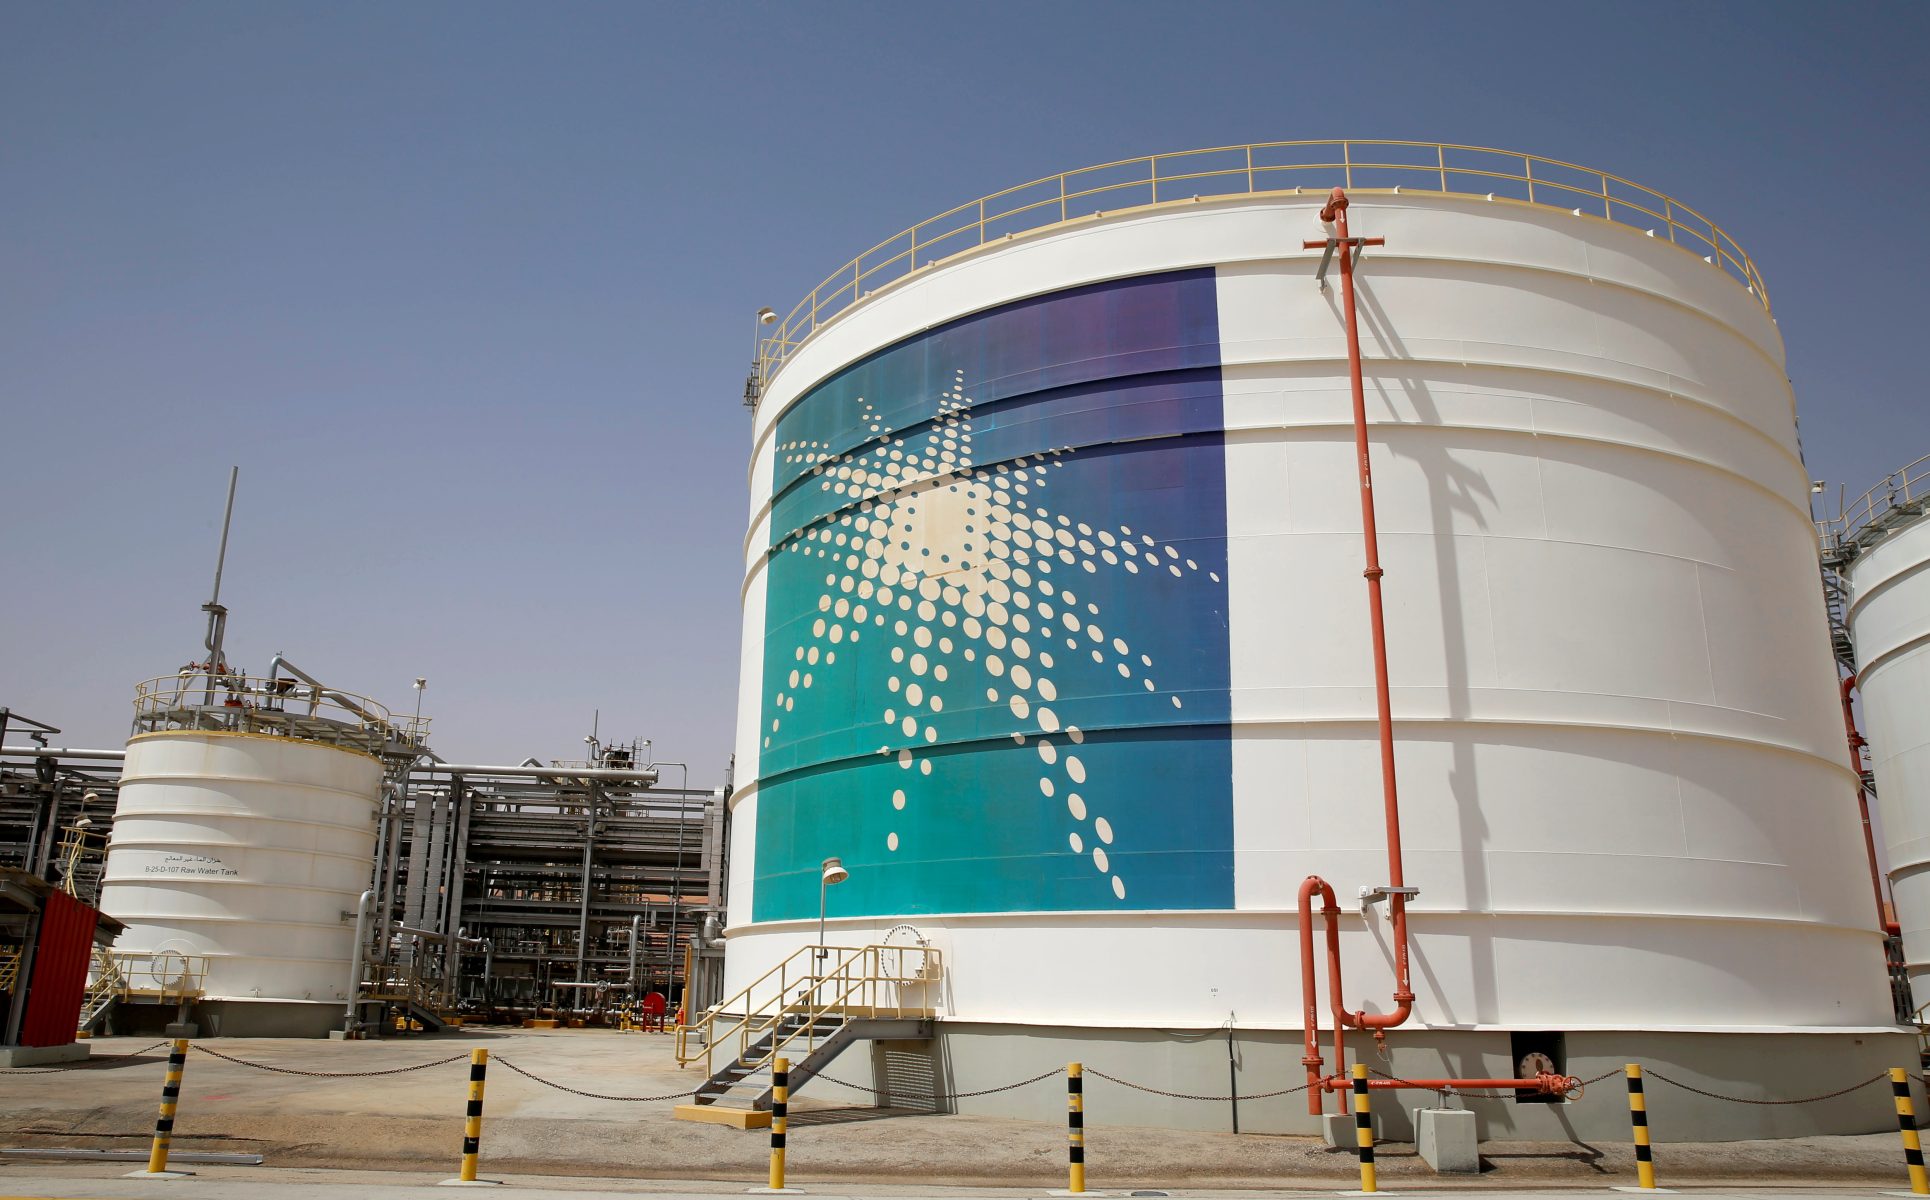 FILE PHOTO: An Aramco oil tank is seen at the Production facility at Saudi Aramco's Shaybah oilfield in the Empty Quarter, Saudi Arabia May 22, 2018. Picture taken May 22, 2018. REUTERS/Ahmed Jadallah